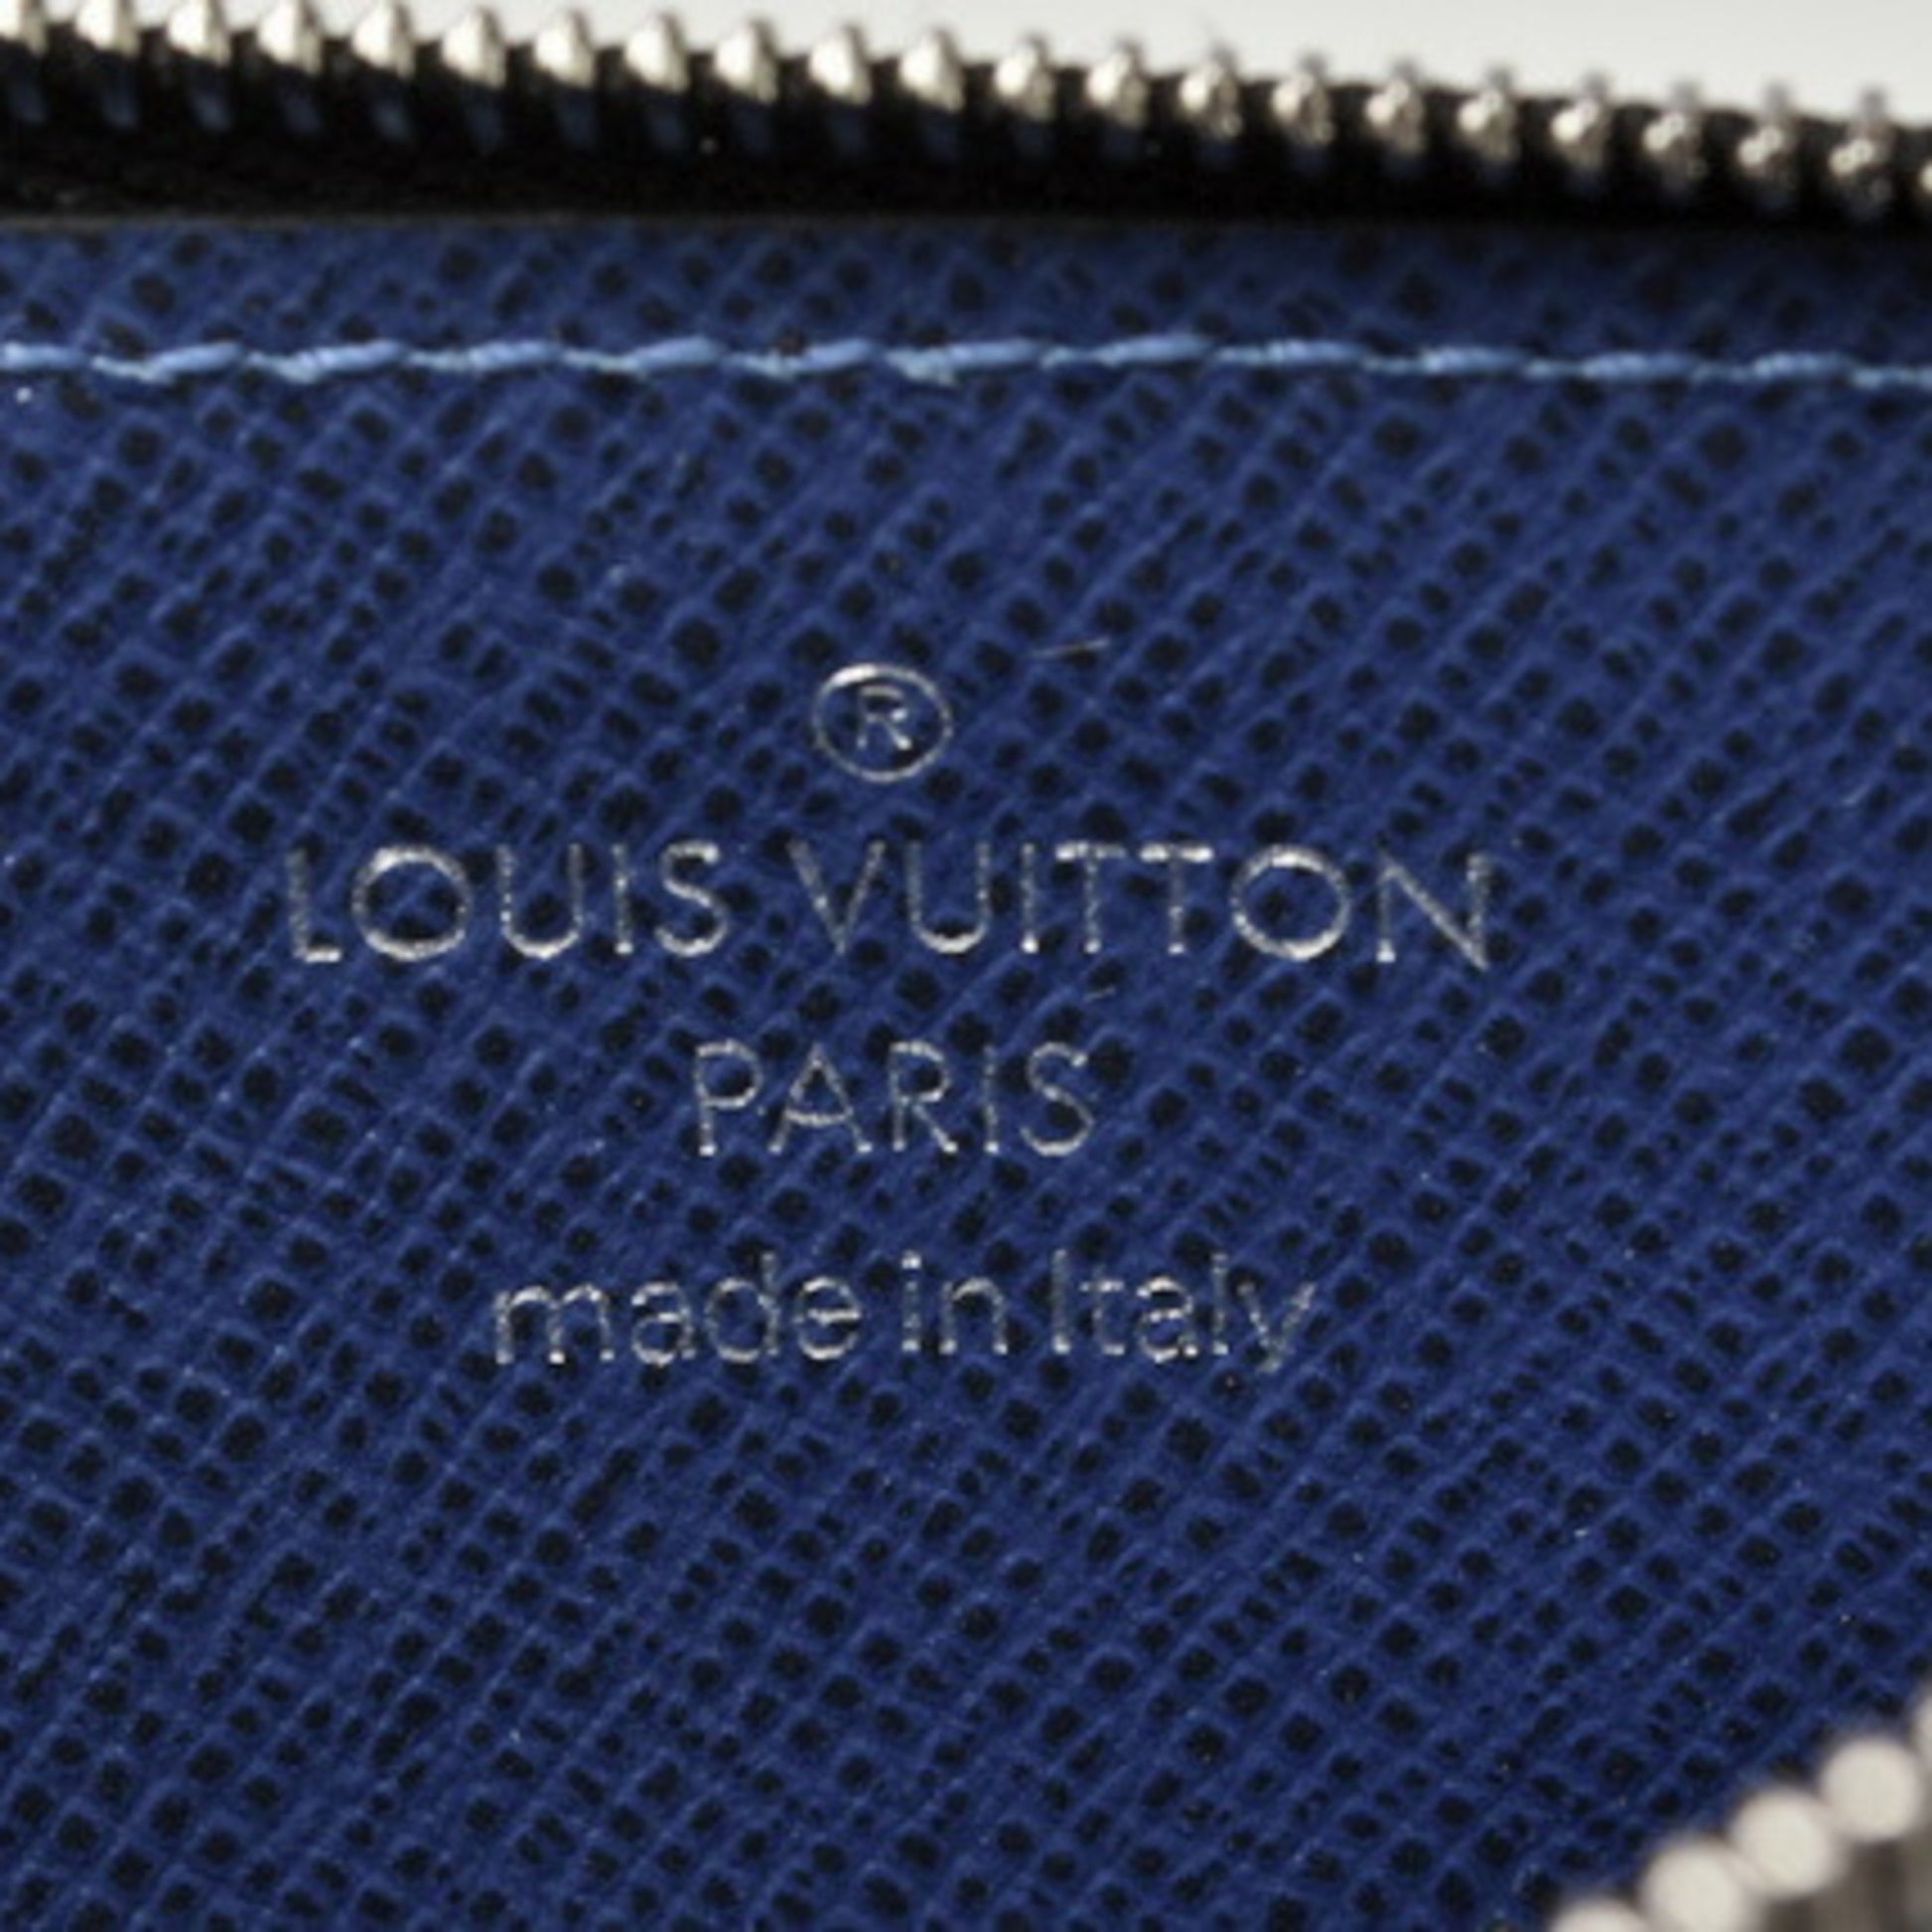 used Pre-owned Louis Vuitton Coin Case/Card Case Louis Vuitton Shippouch Card Holder Taigarama Cobalt M30270 (Like New), Men's, Size: (HxWxD): 8cm x